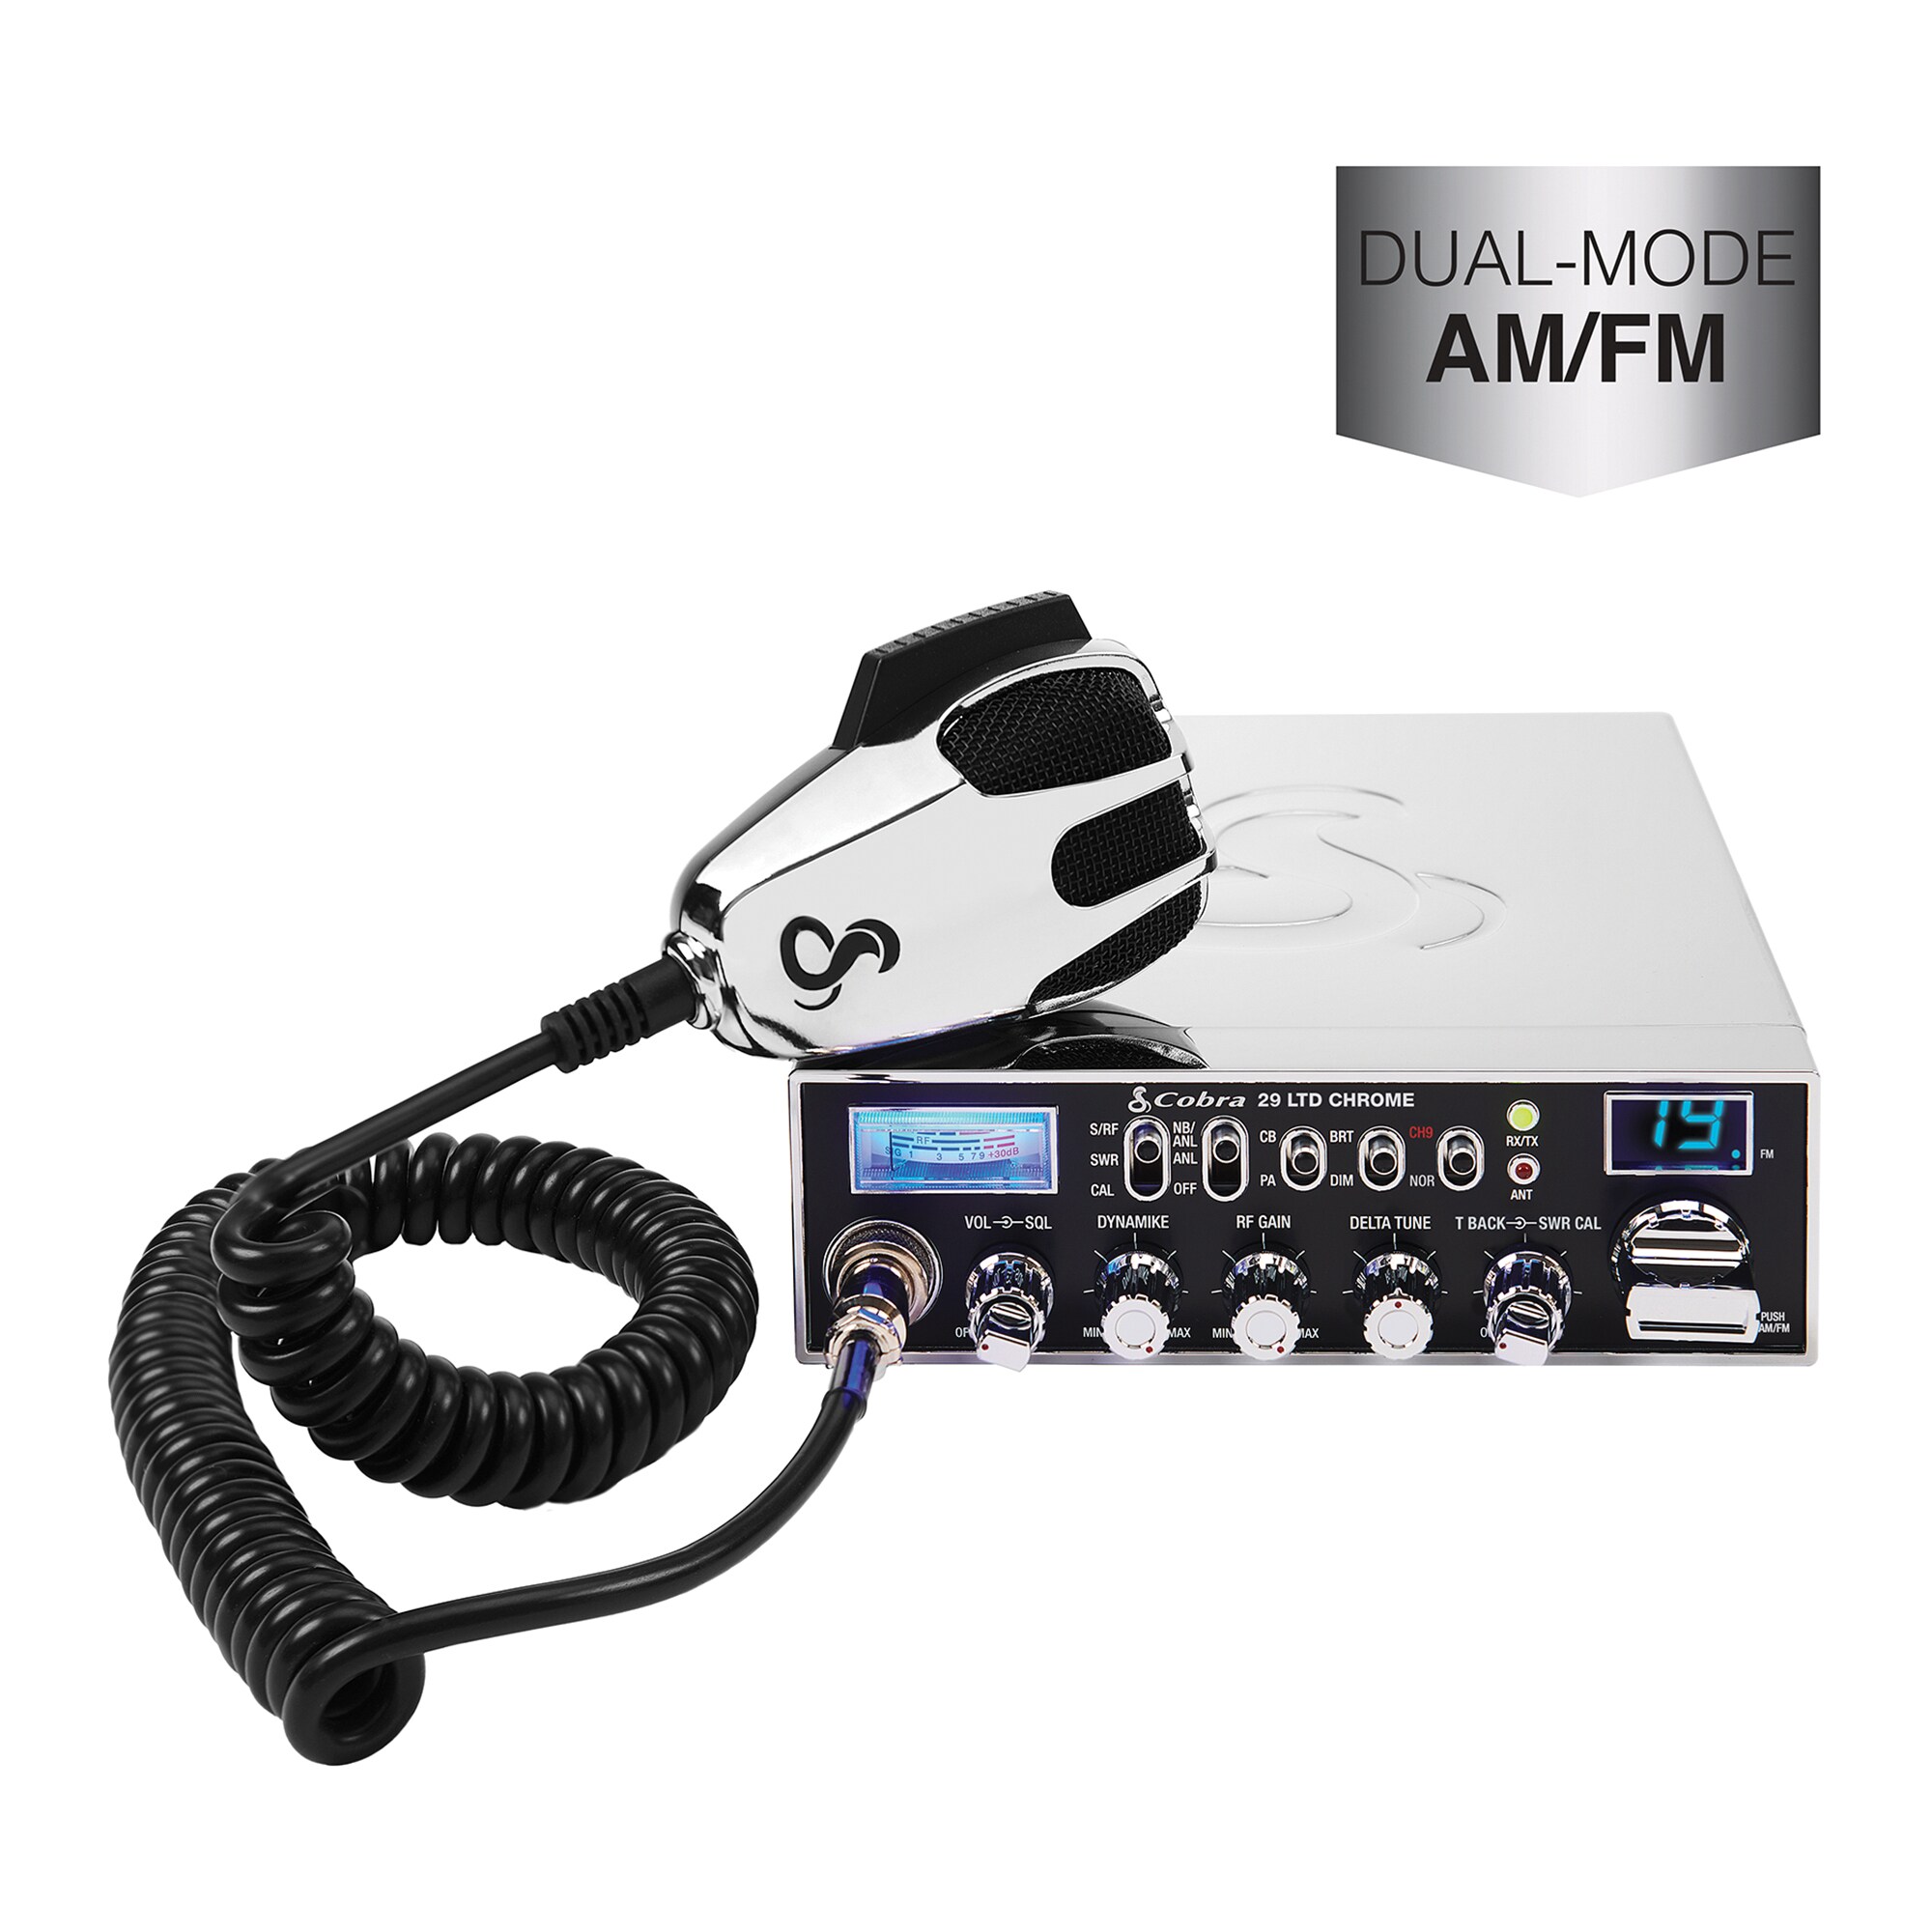 Cobra 29 LTD Classic 40-Channel AM/FM CB Radio with Microphone in Black  CCBP29LT01 - The Home Depot